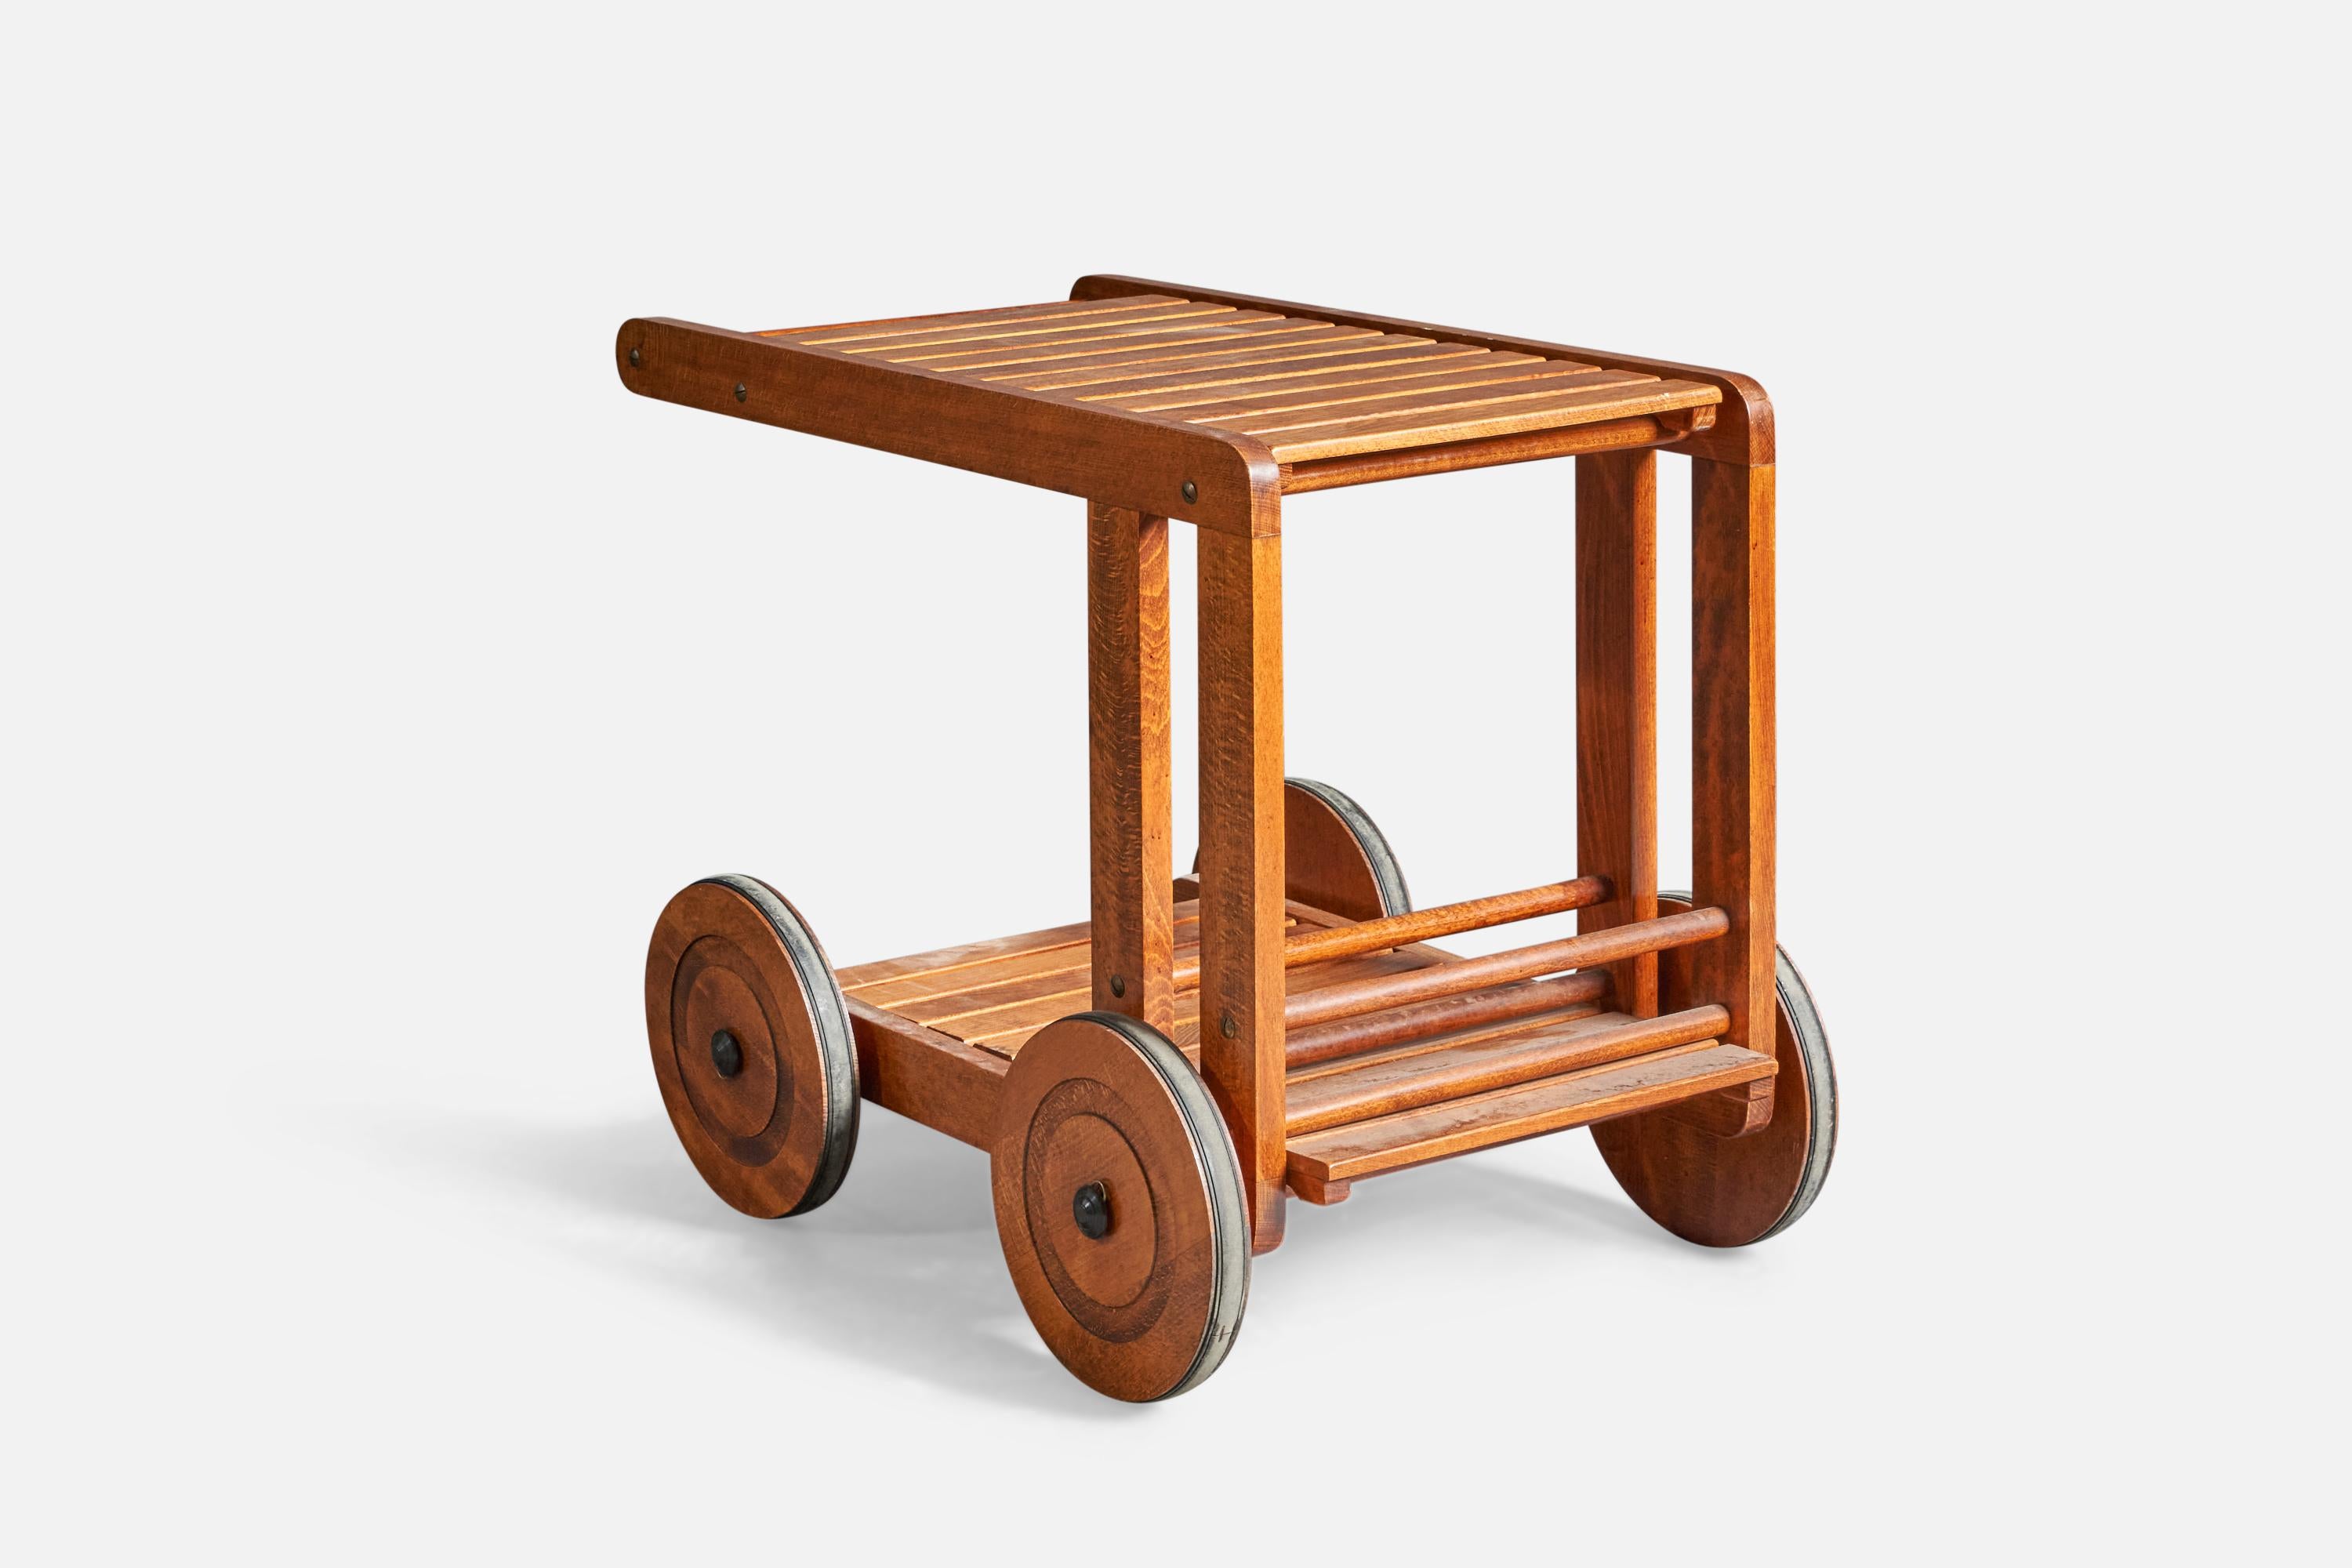 A wood and metal bar cart or drink trolley, designed and produced in Sweden, c. 1970s.